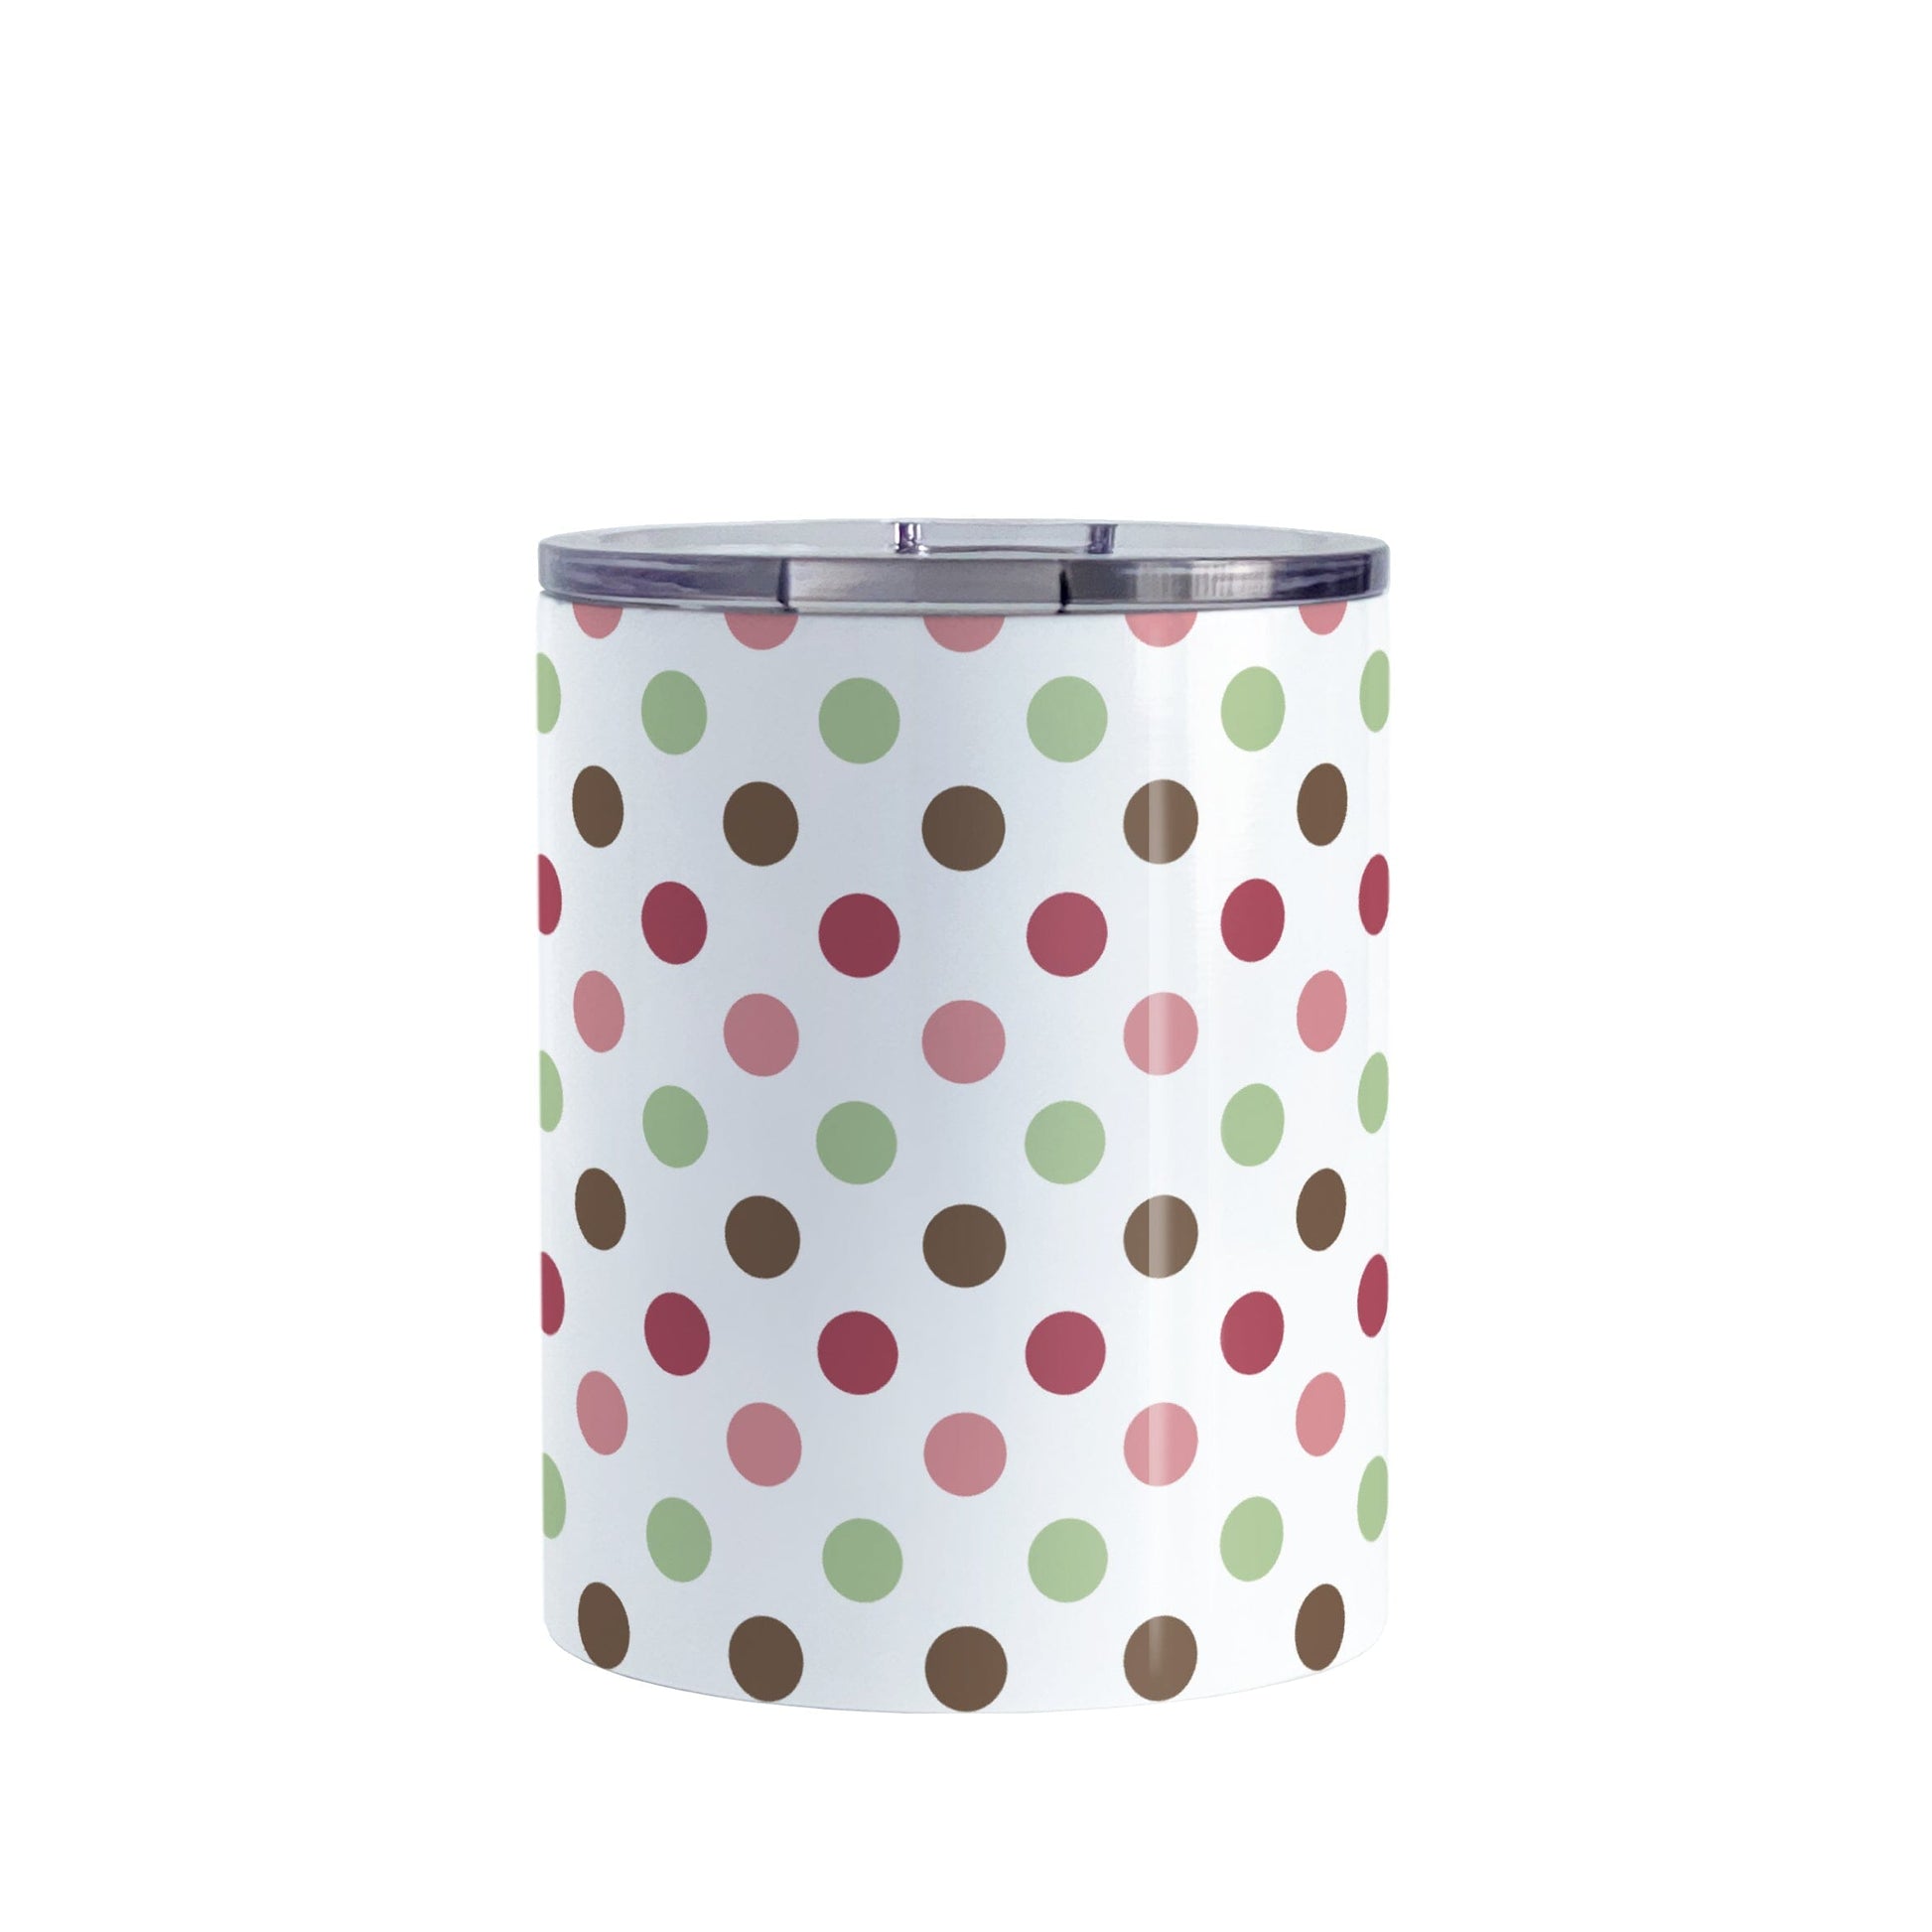 Berry Green Polka Dots Tumbler Cup (10oz) at Amy's Coffee Mugs. A stainless steel tumbler cup designed with a pattern of polka dots a color palette of berry pink hues, sage green, and brown that wraps around the cup.